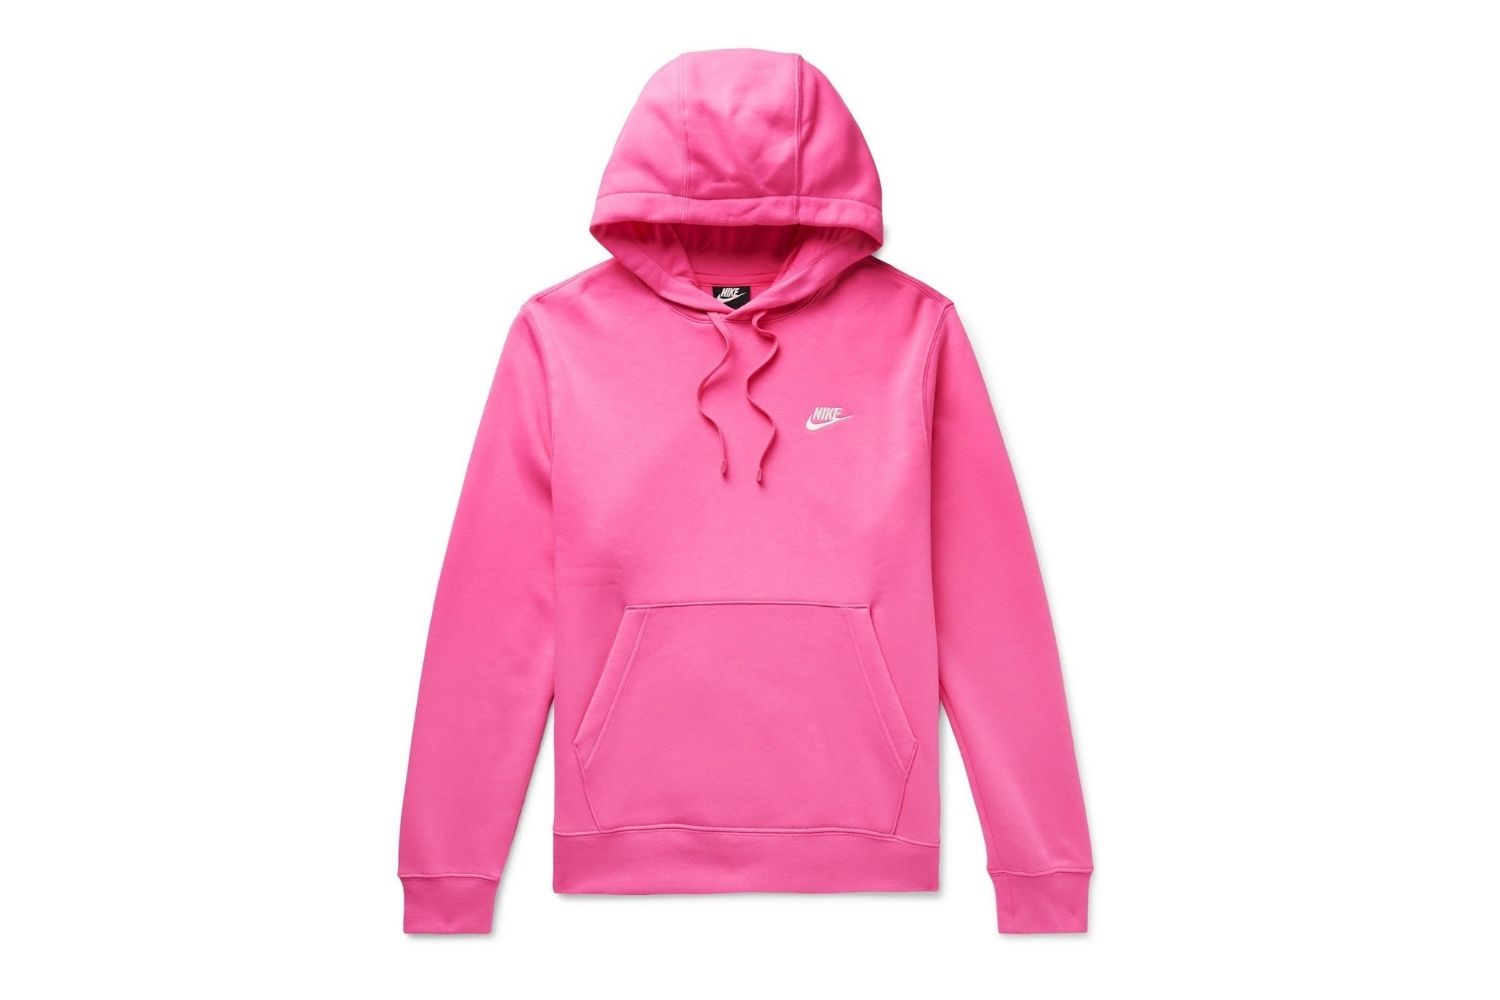 19-astonishing-facts-about-pink-nike-hoodie